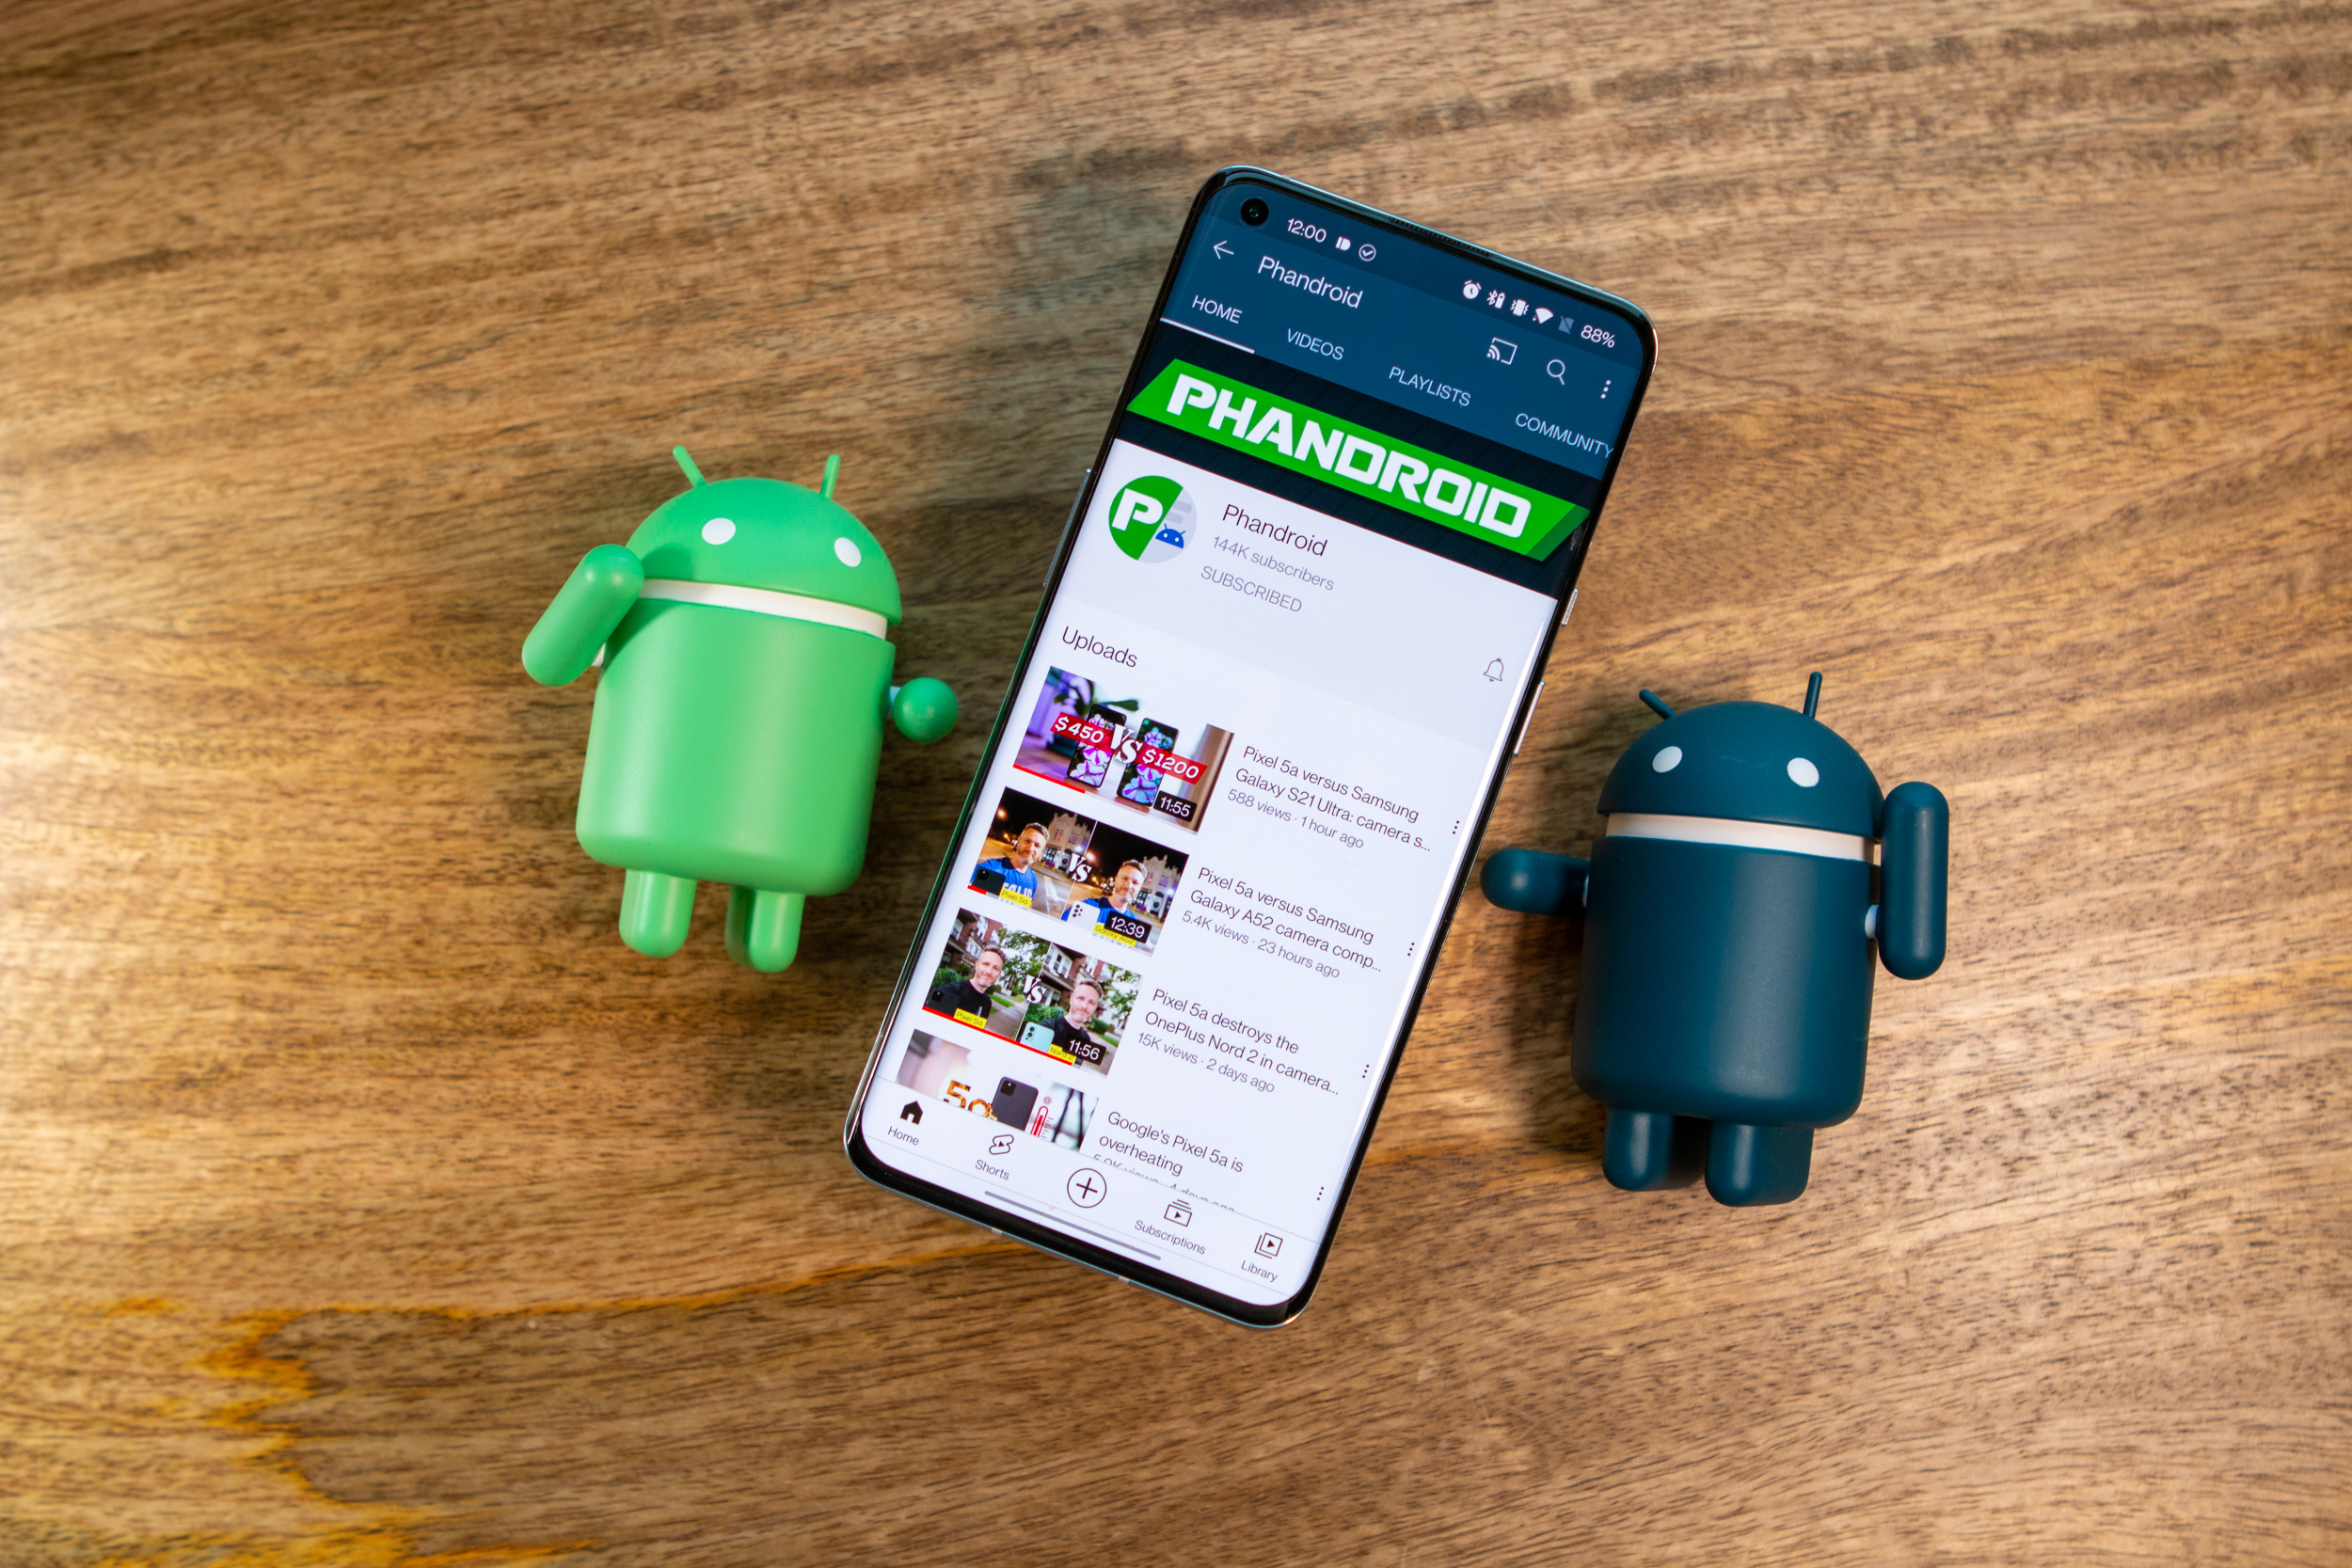 Phandroid: a smartphone platform for the masses